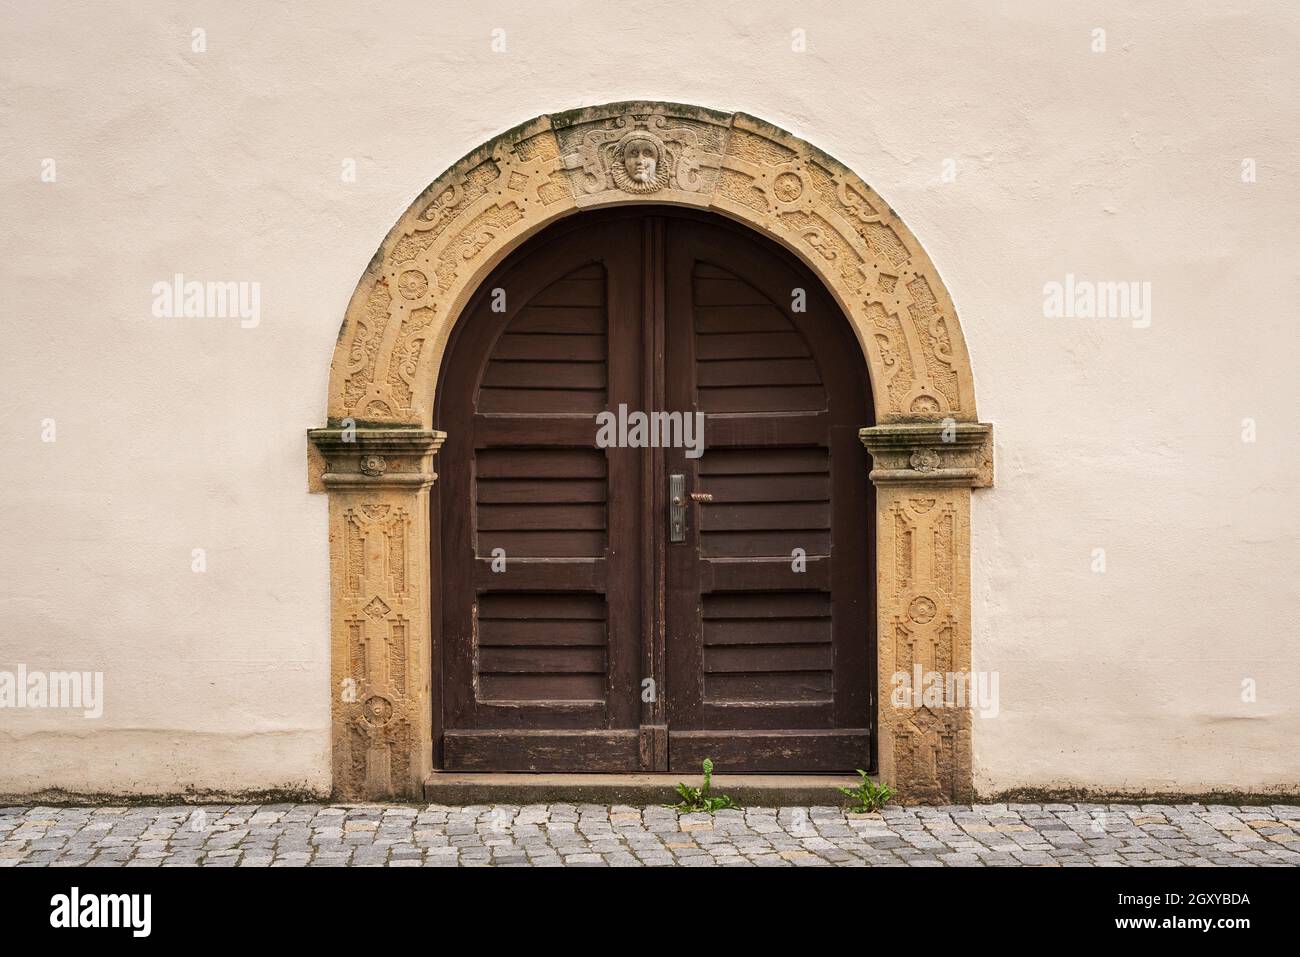 An old arched double-leaf door. Stock Photo